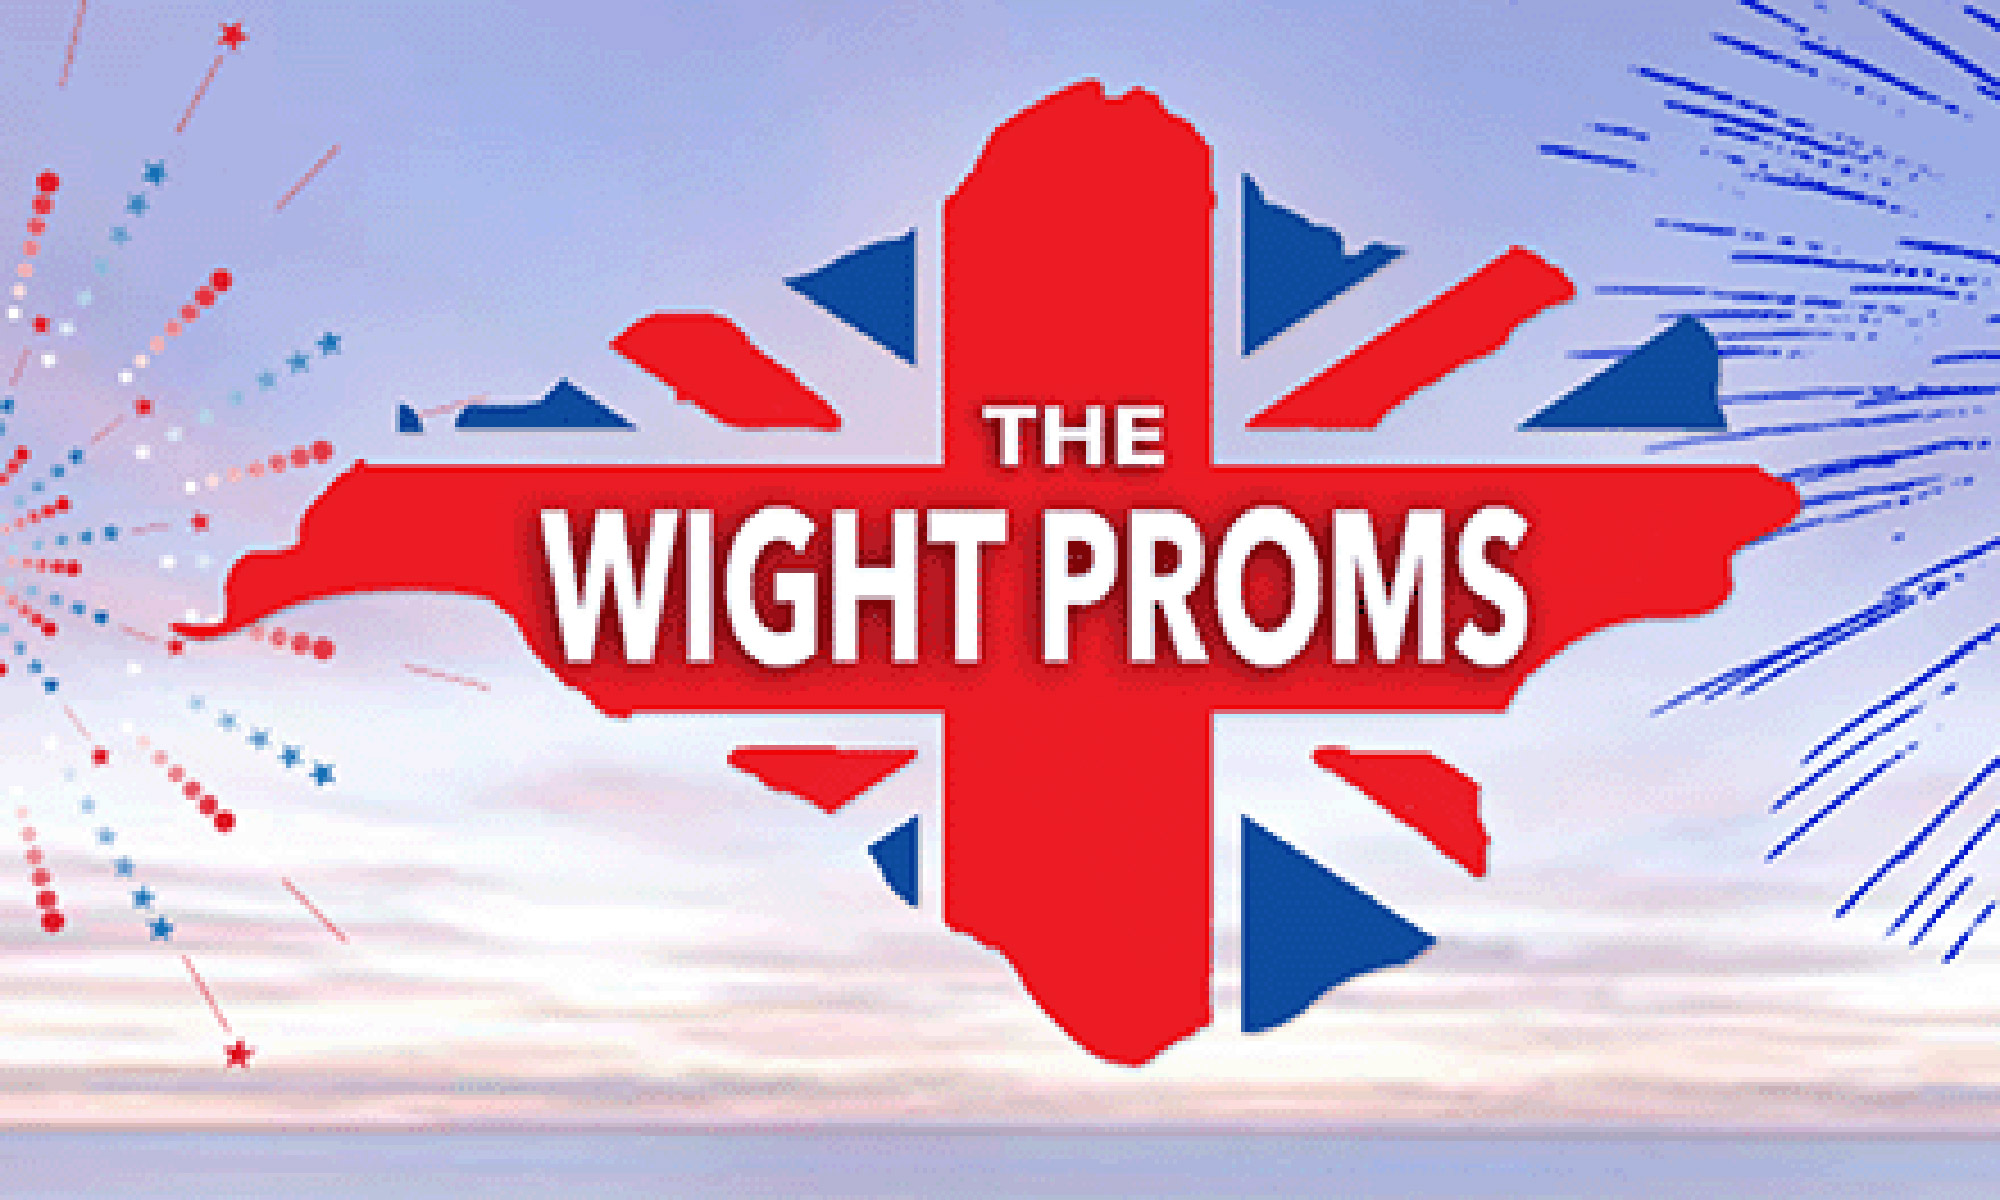 The Wight Proms logo